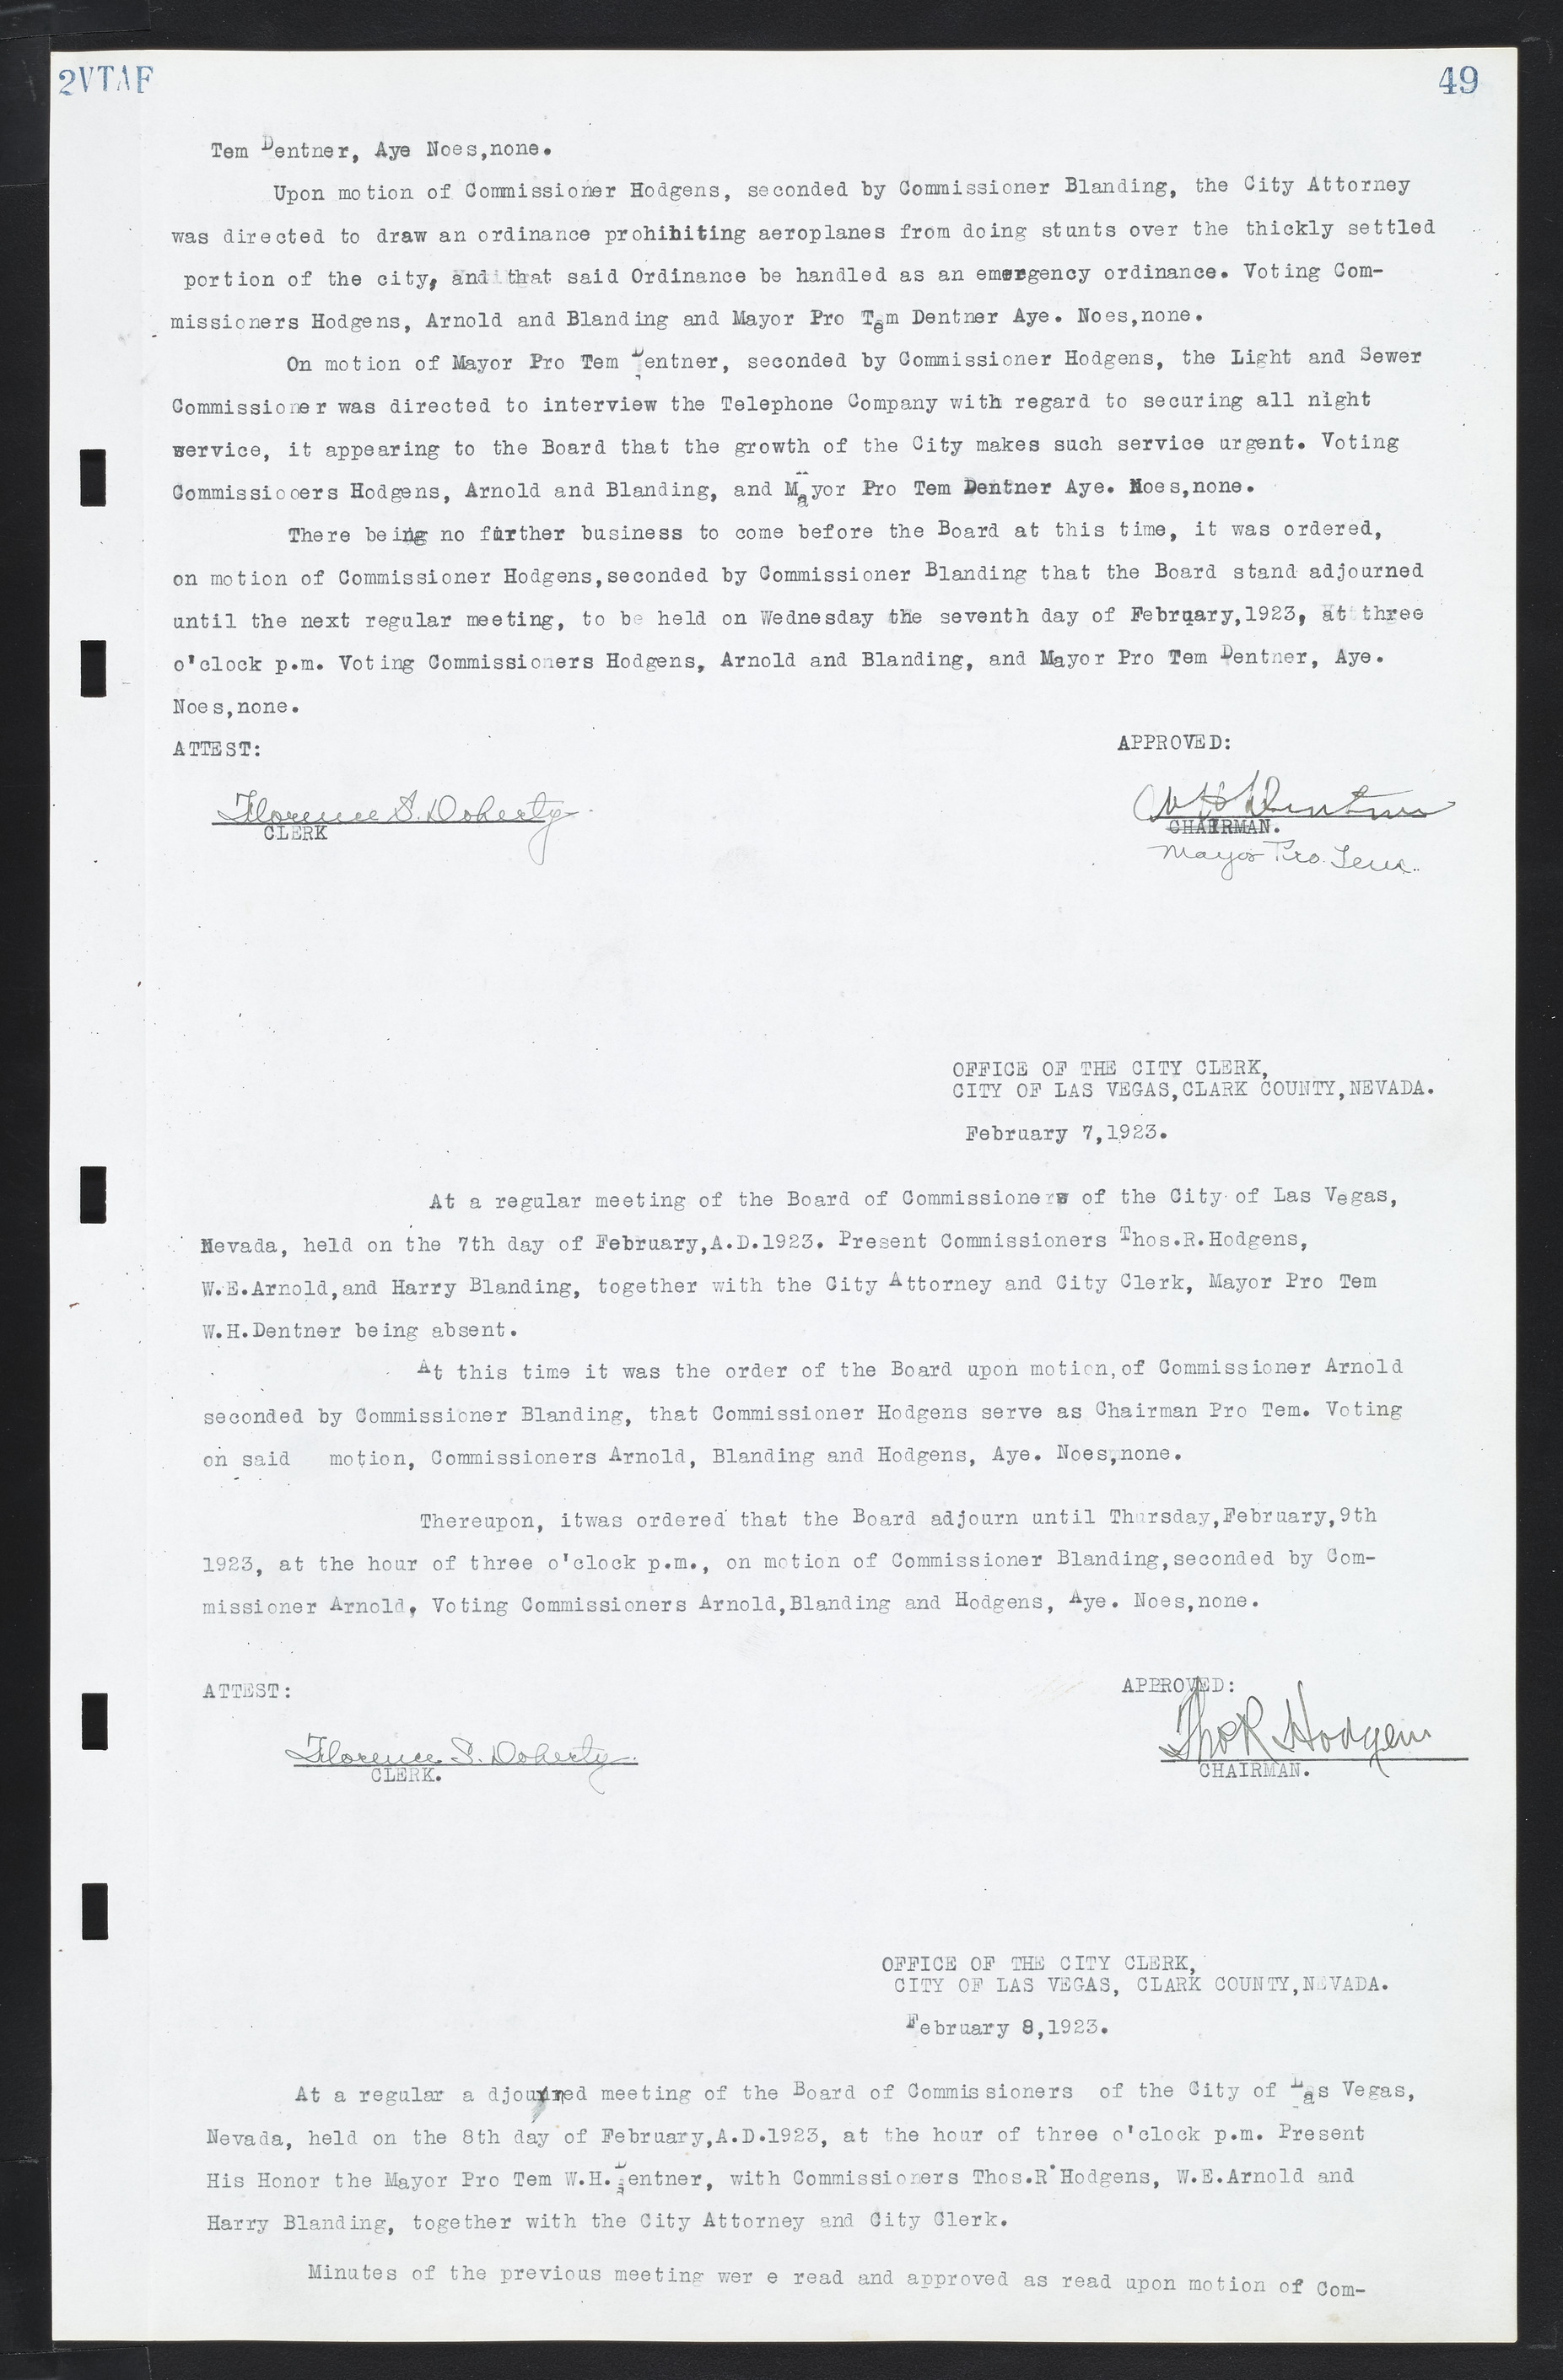 Las Vegas City Commission Minutes, March 1, 1922 to May 10, 1929, lvc000002-56